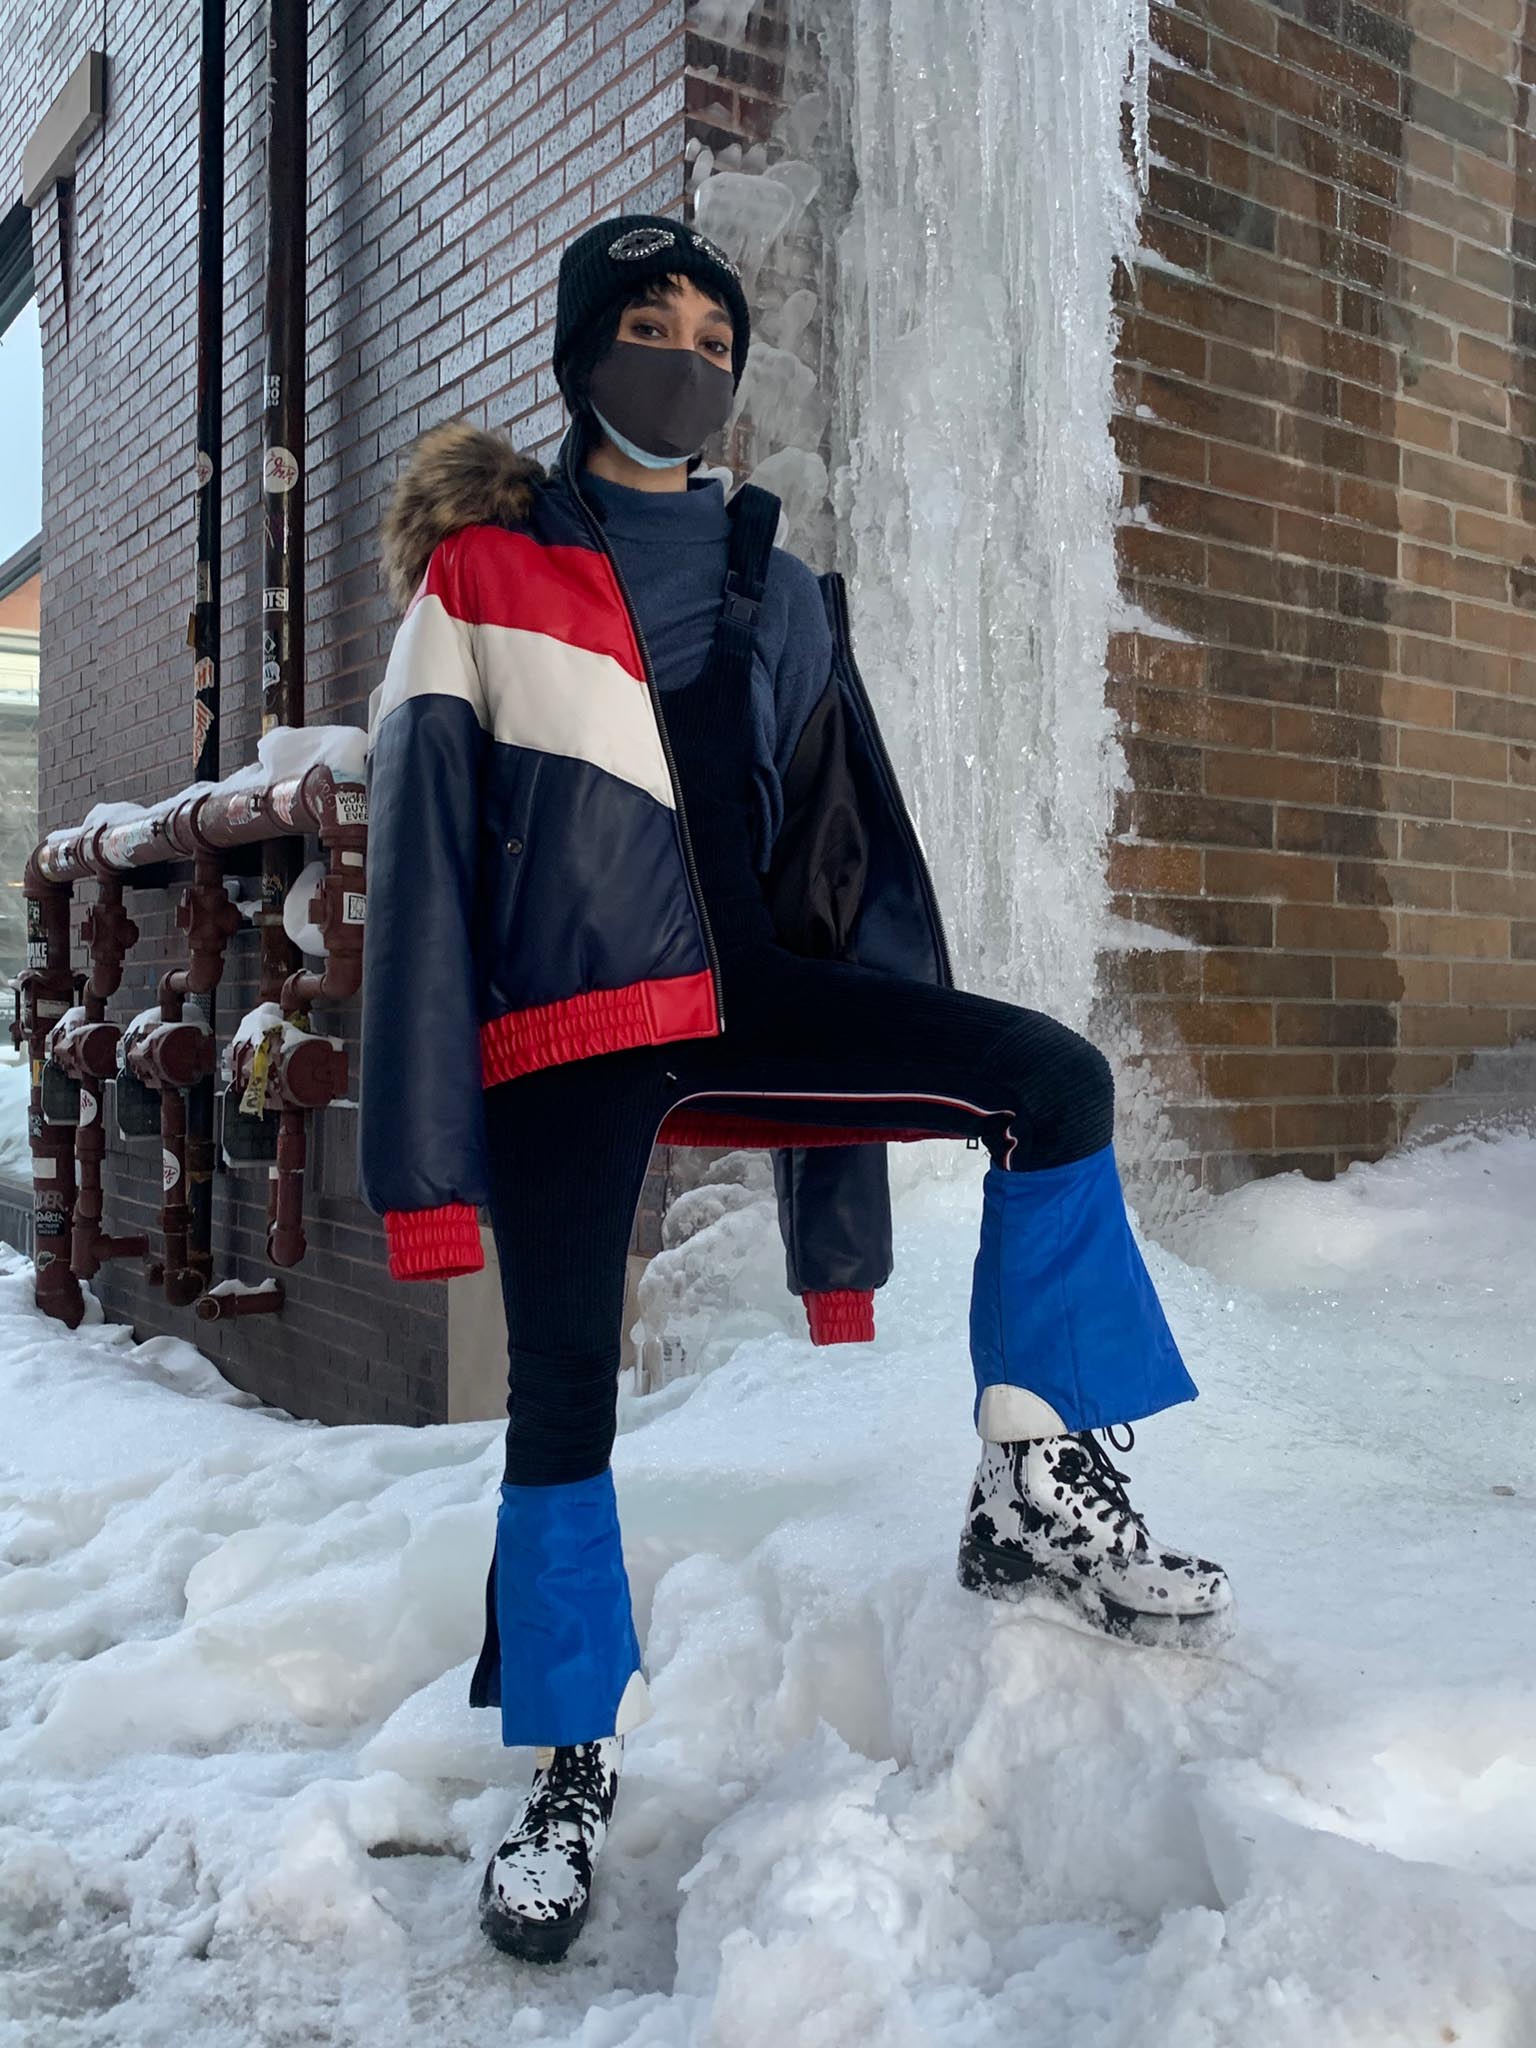 A person stands on snow next to an iced-over building wearing vintage ski wear and cow print boots